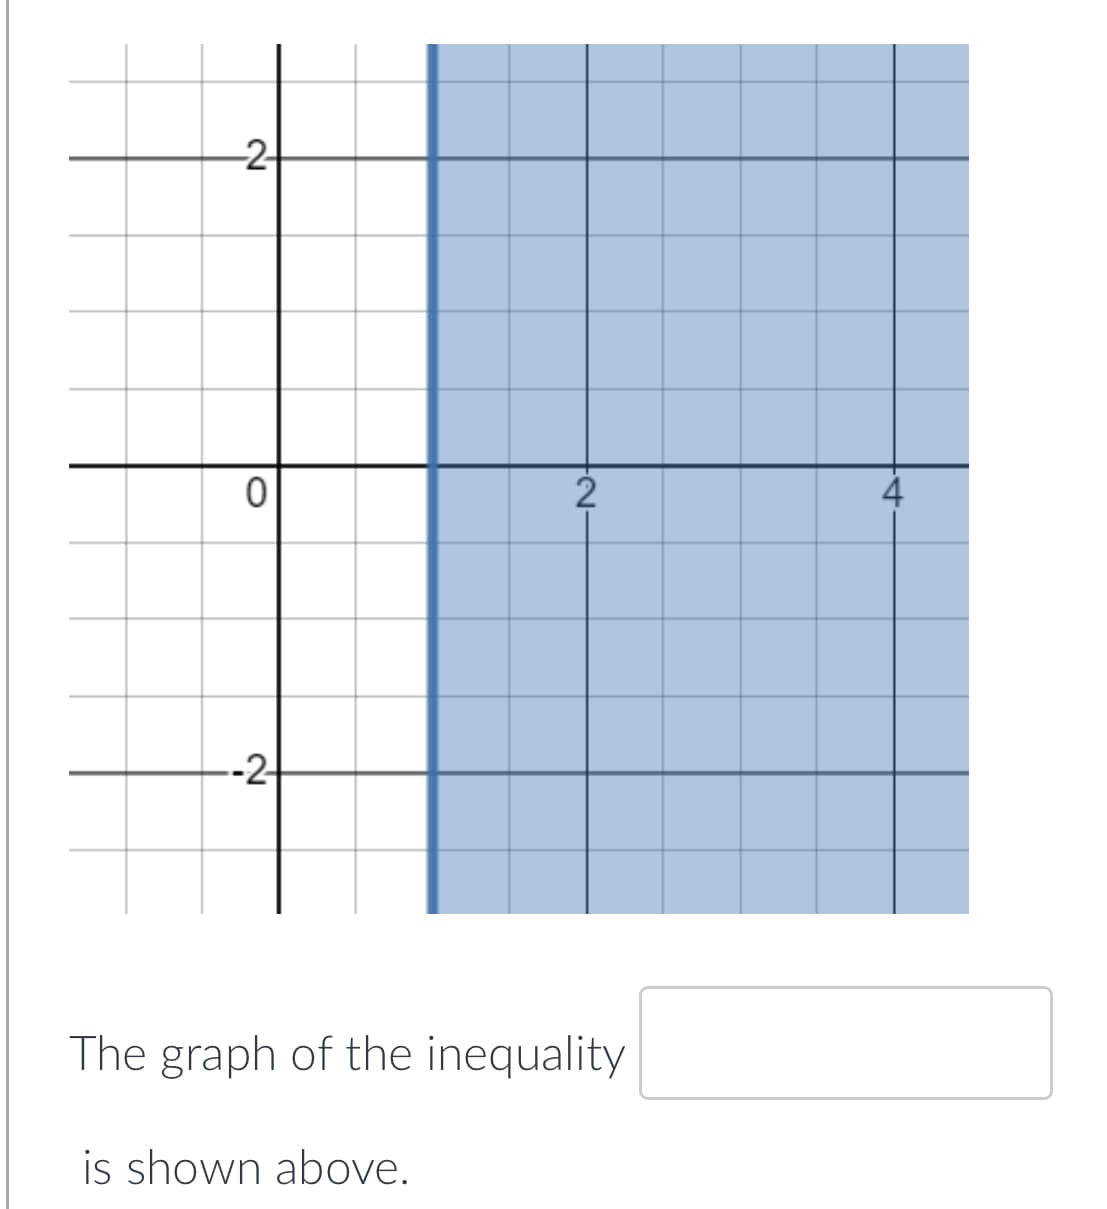 -2-
0
--2-
2
The graph of the inequality
is shown above.